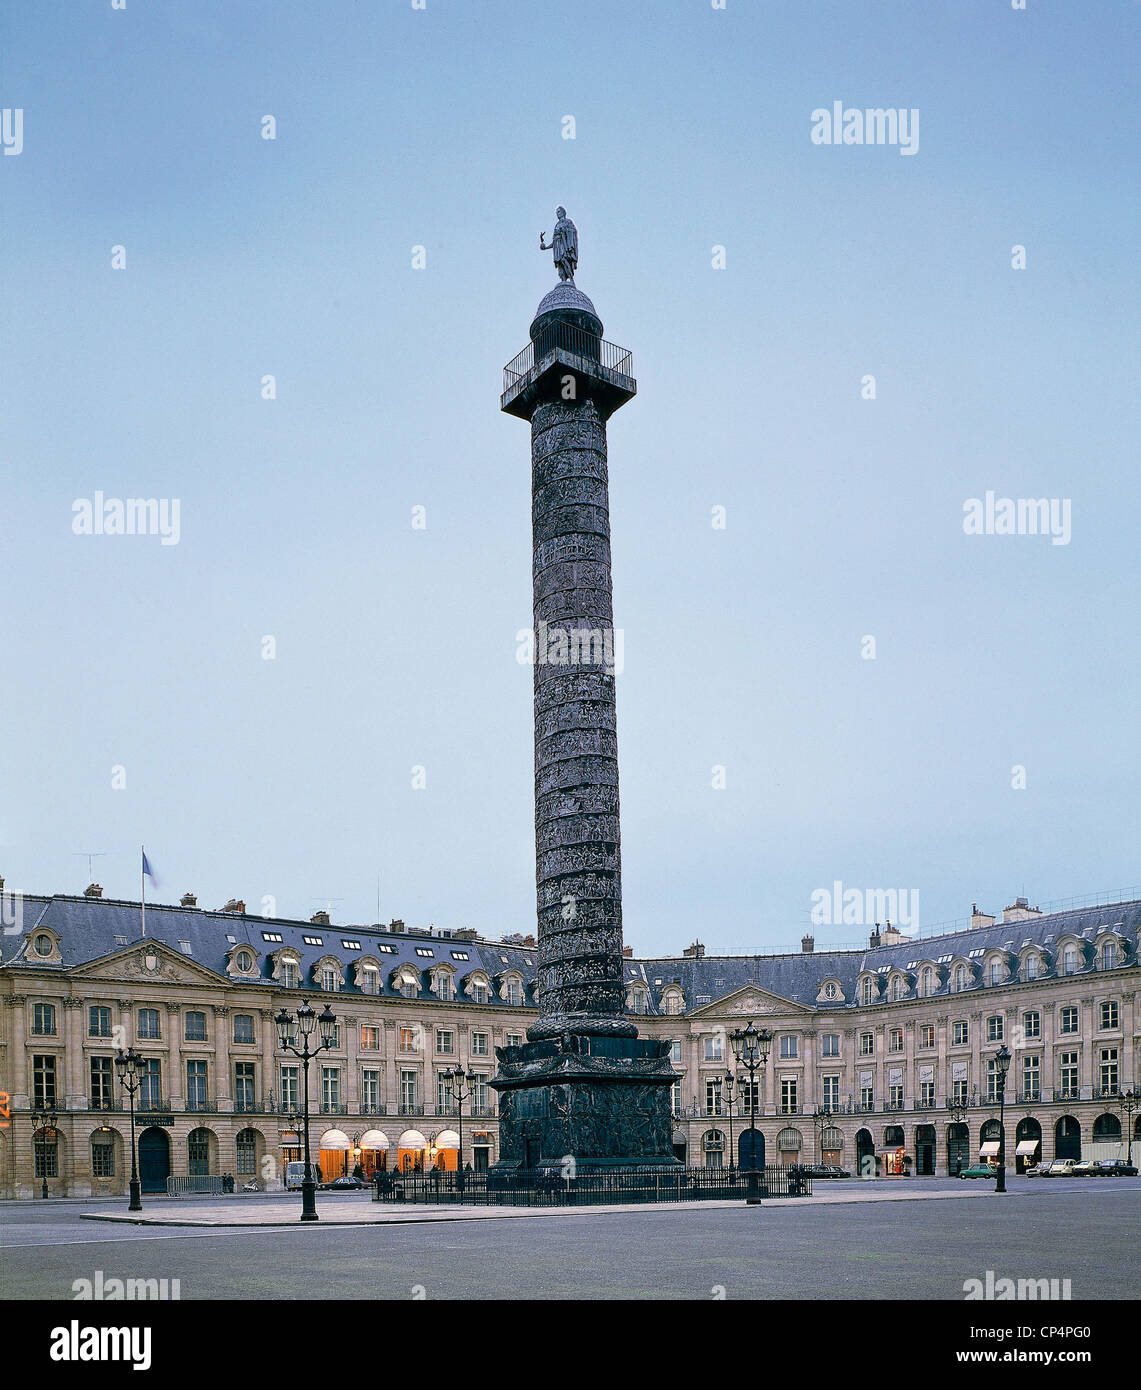 France Paris. bronze column in Place Vendome (Colonne de la Grande Armee), adorned with bas-relief on upward spiral. At top of Stock Photo